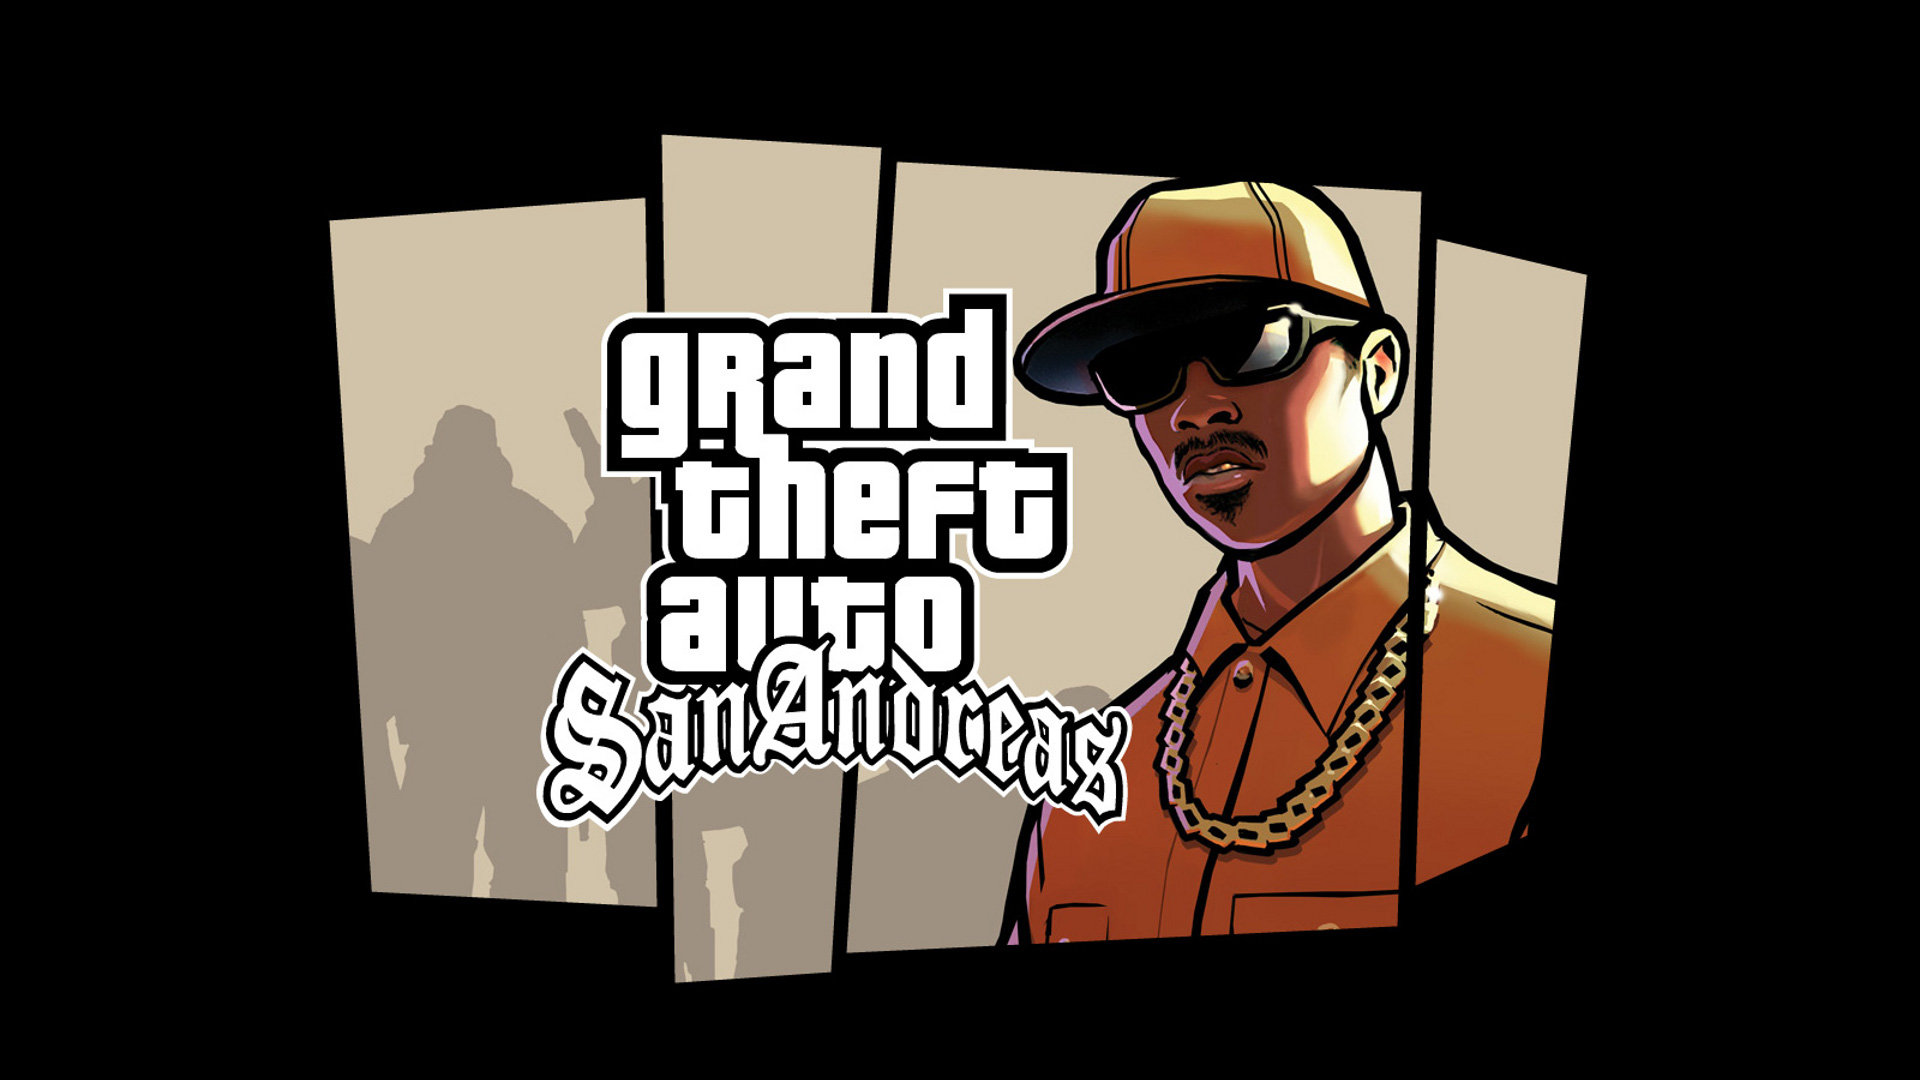 Best Grand Theft Auto: San Andreas (GTA SA) background ID:72705 for High Resolution full hd 1080p desktop